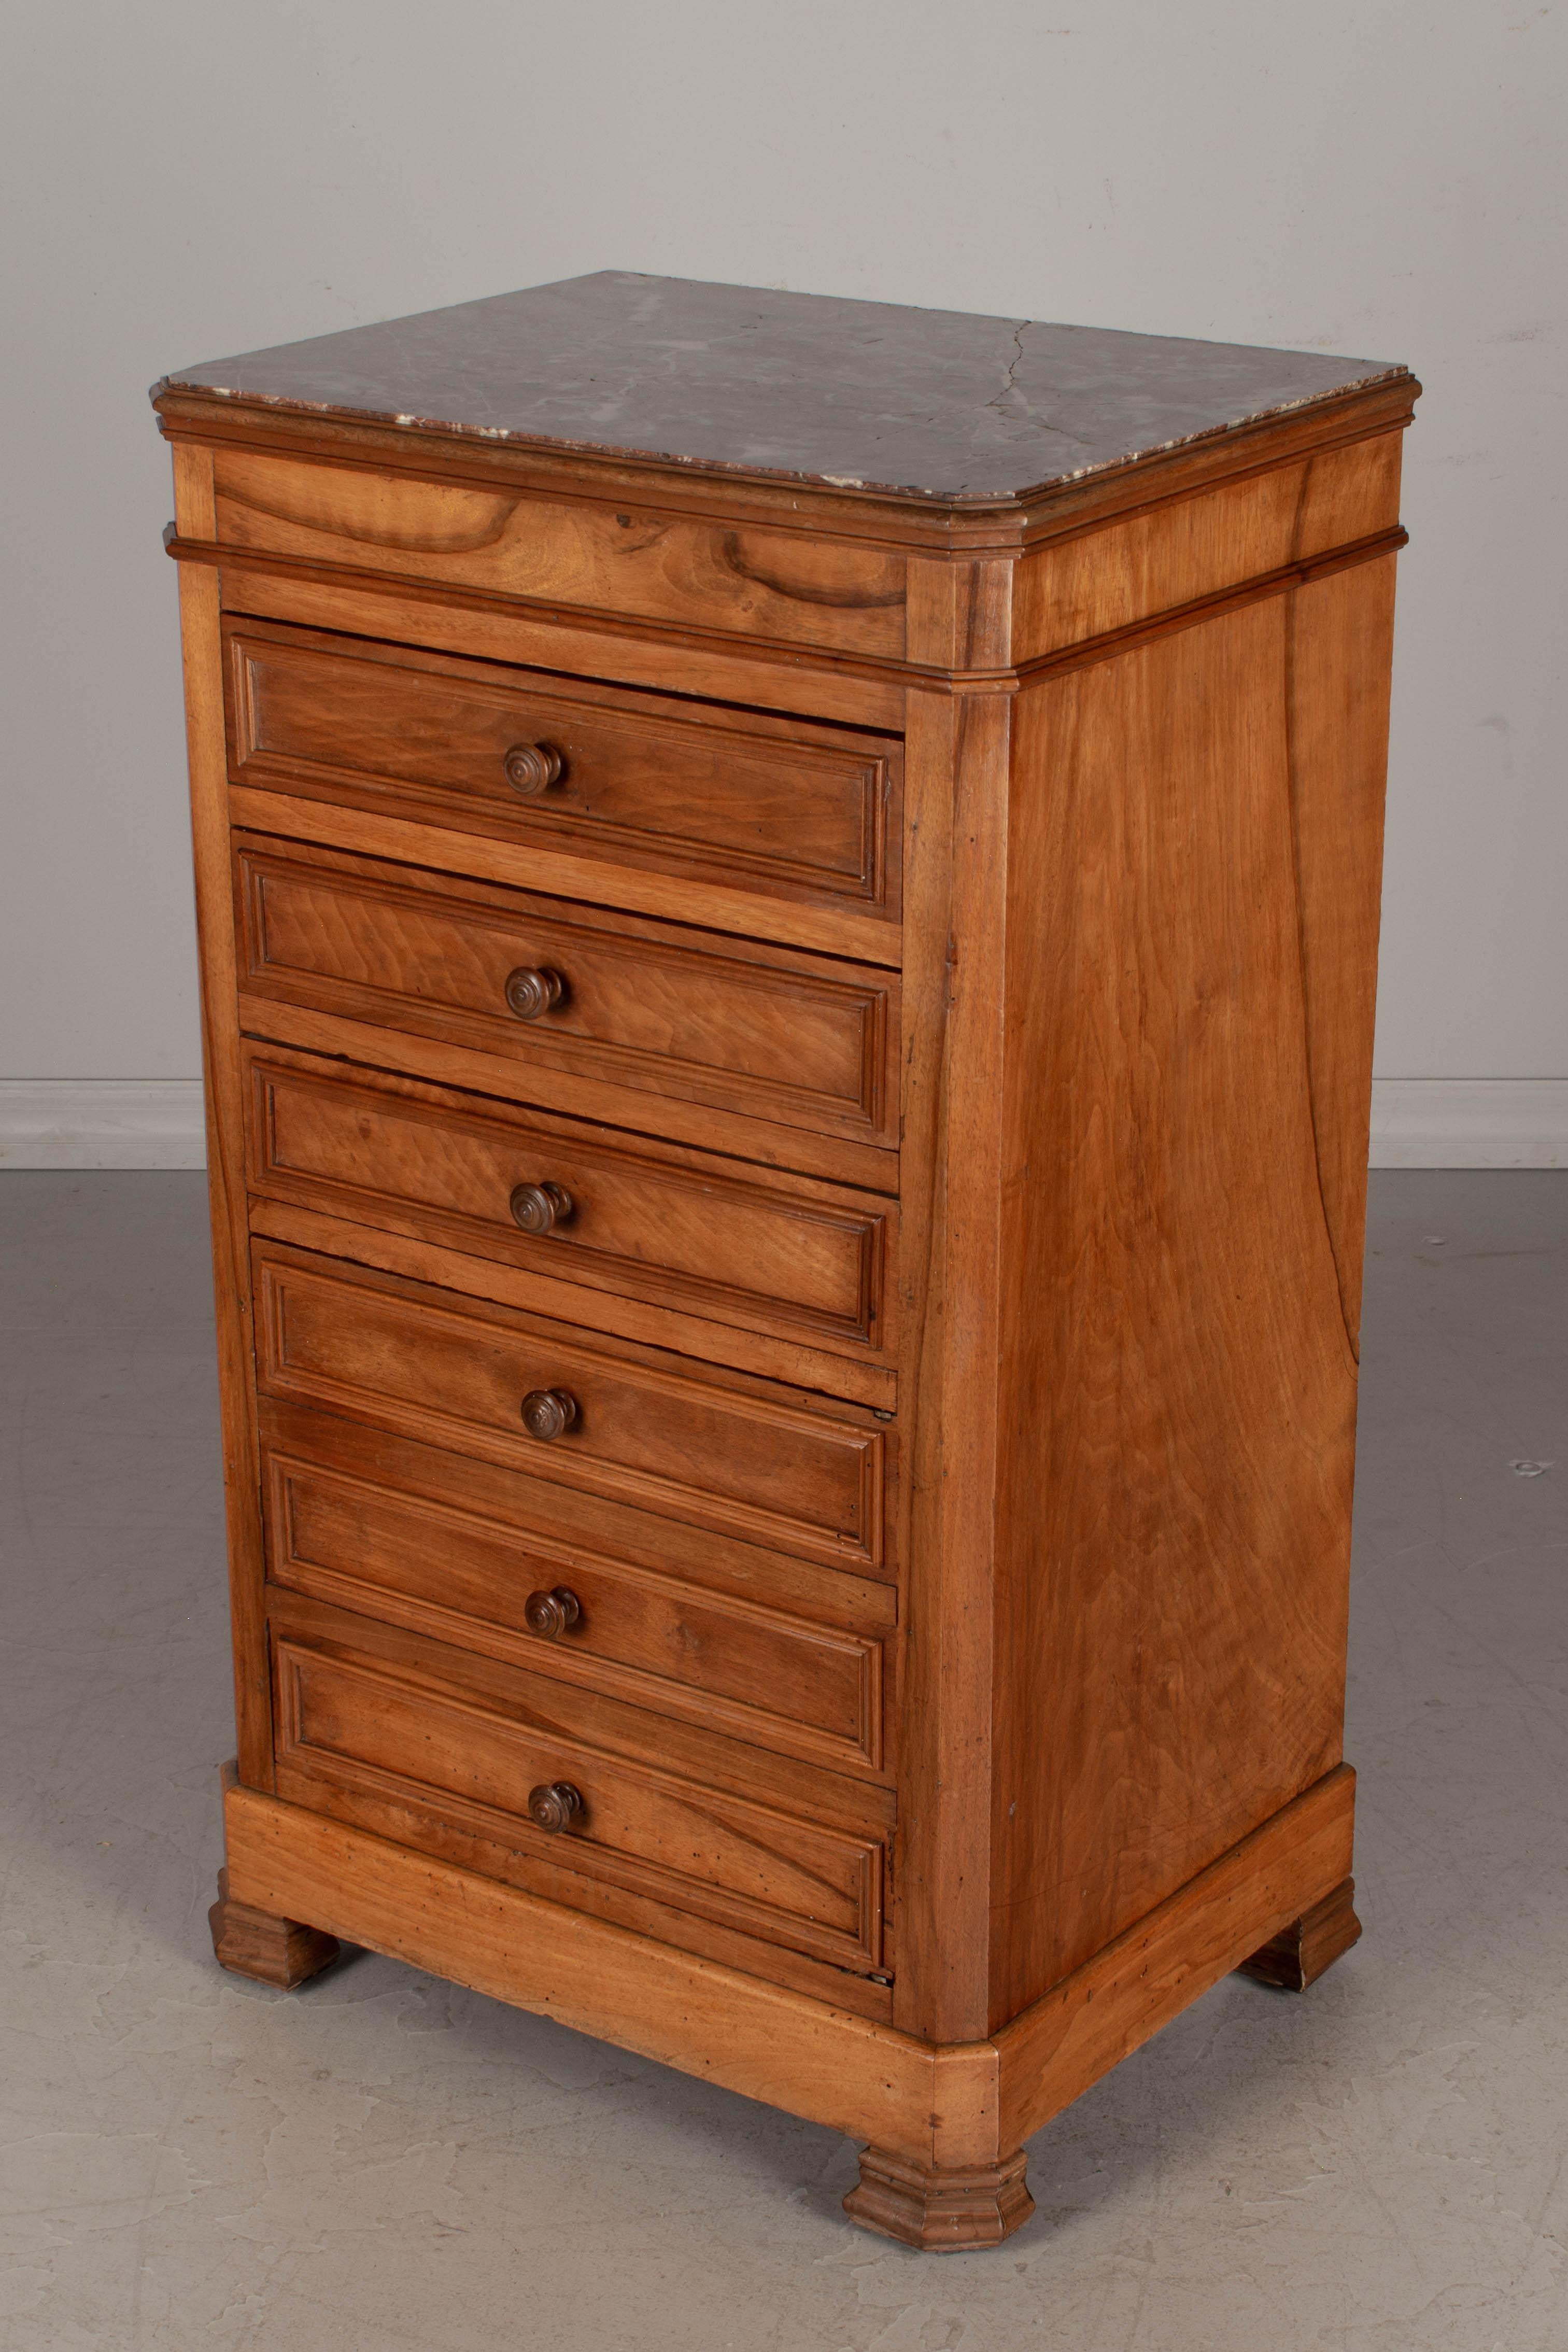 A French Louis-Philippe style coffre fort, or stand with hidden safe. Made of walnut veneer with inset marble top. Three dovetailed drawers with a false front cabinet below. Concealed safe is in working order with key and combination lock. Bauche